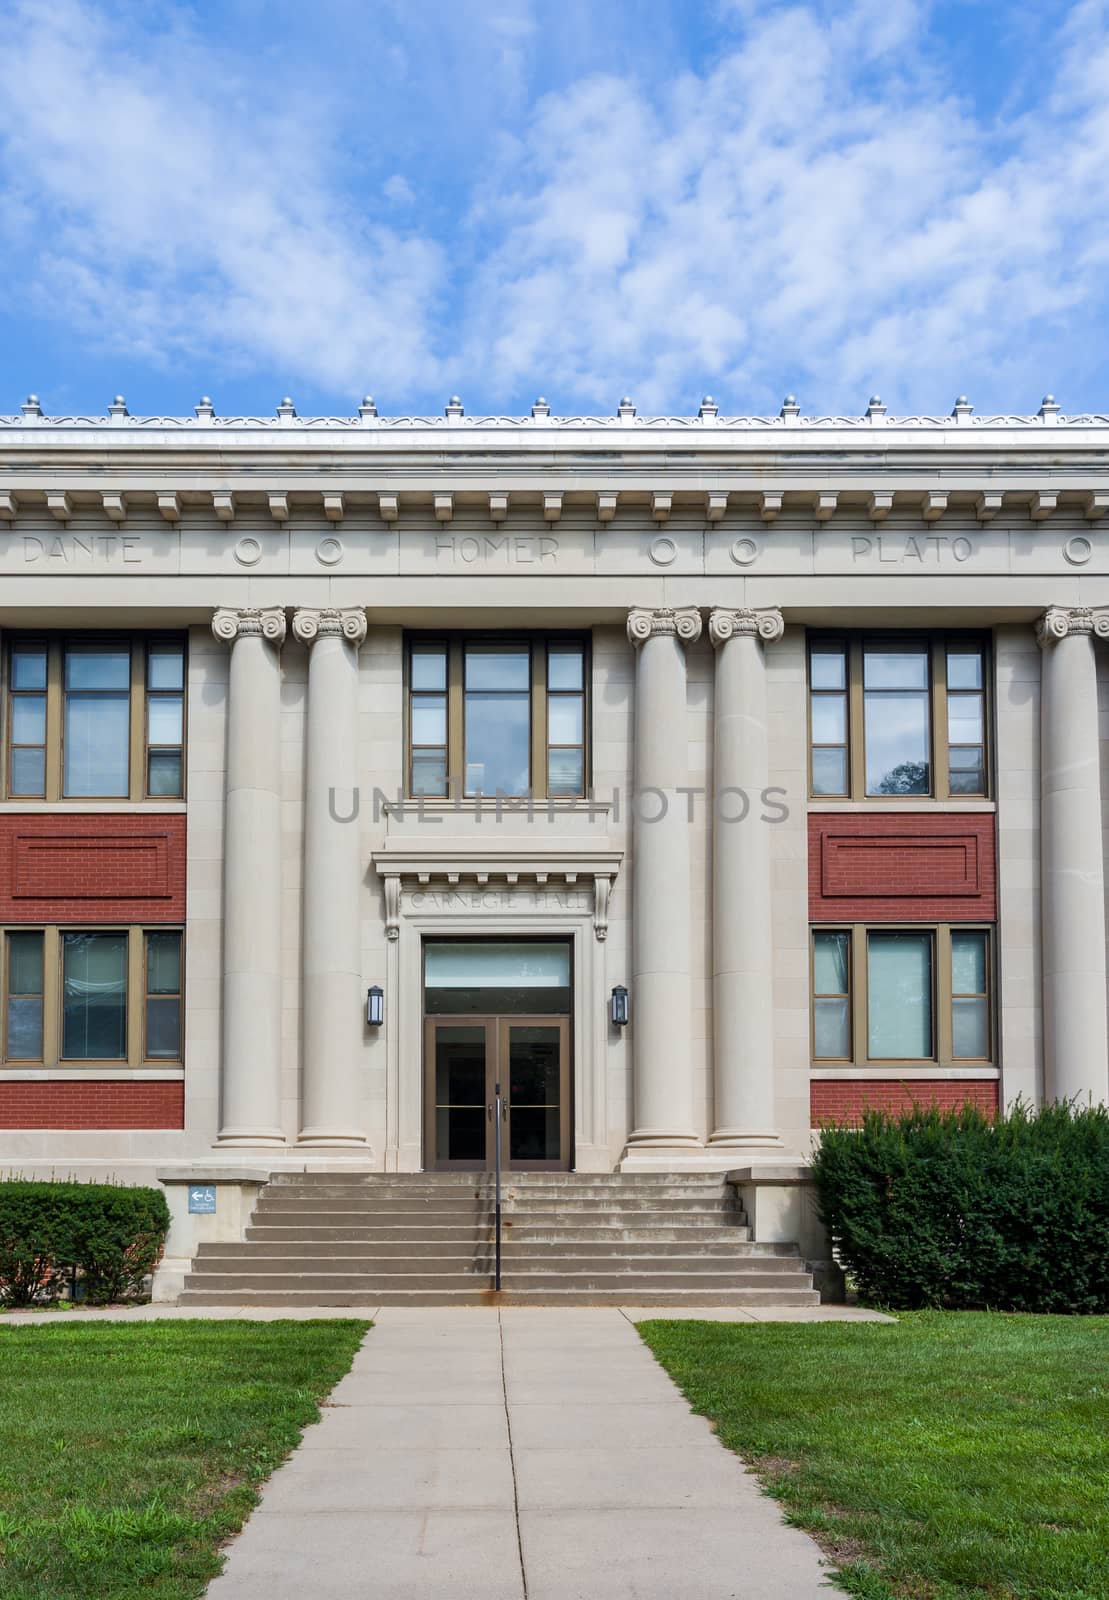 GRINNELL, IA/USA - AUGUST 8, 2015: Carnegie Hall on the campus of Grinell College. Grinnell College is a private liberal arts college  known for its rigorous academics and tradition of social responsibility.